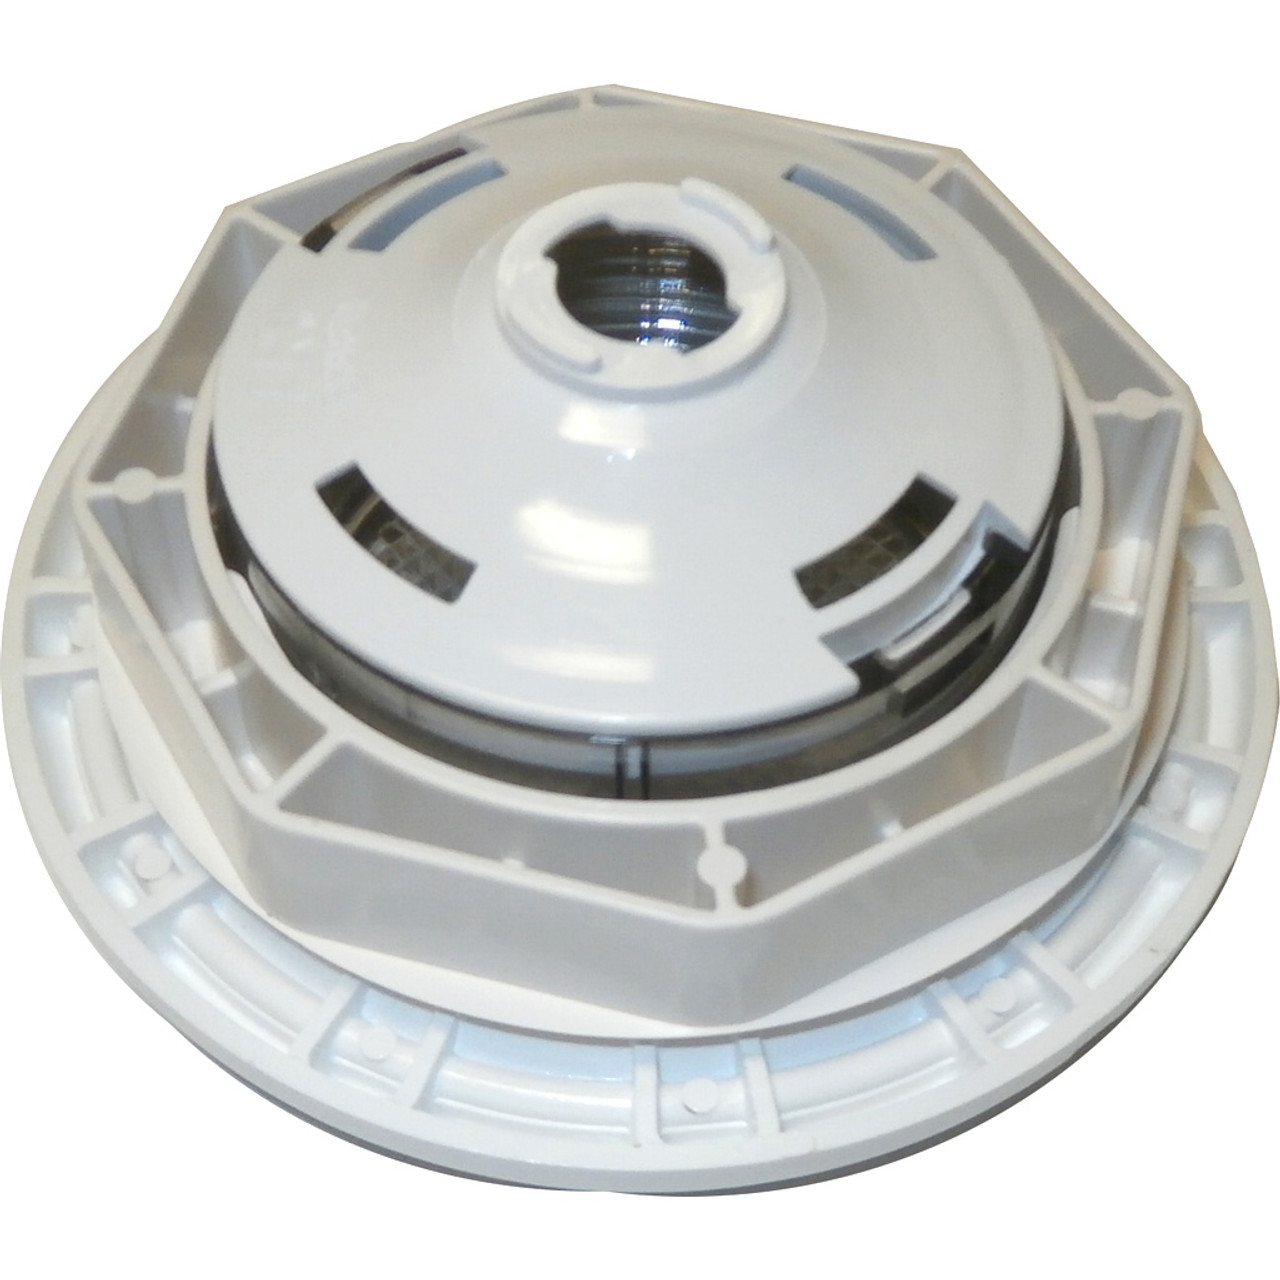 Master Spa - X259255 - Spa Lighting - 5 inch Jumbo Light Assembly for Master Spas - Assembled View